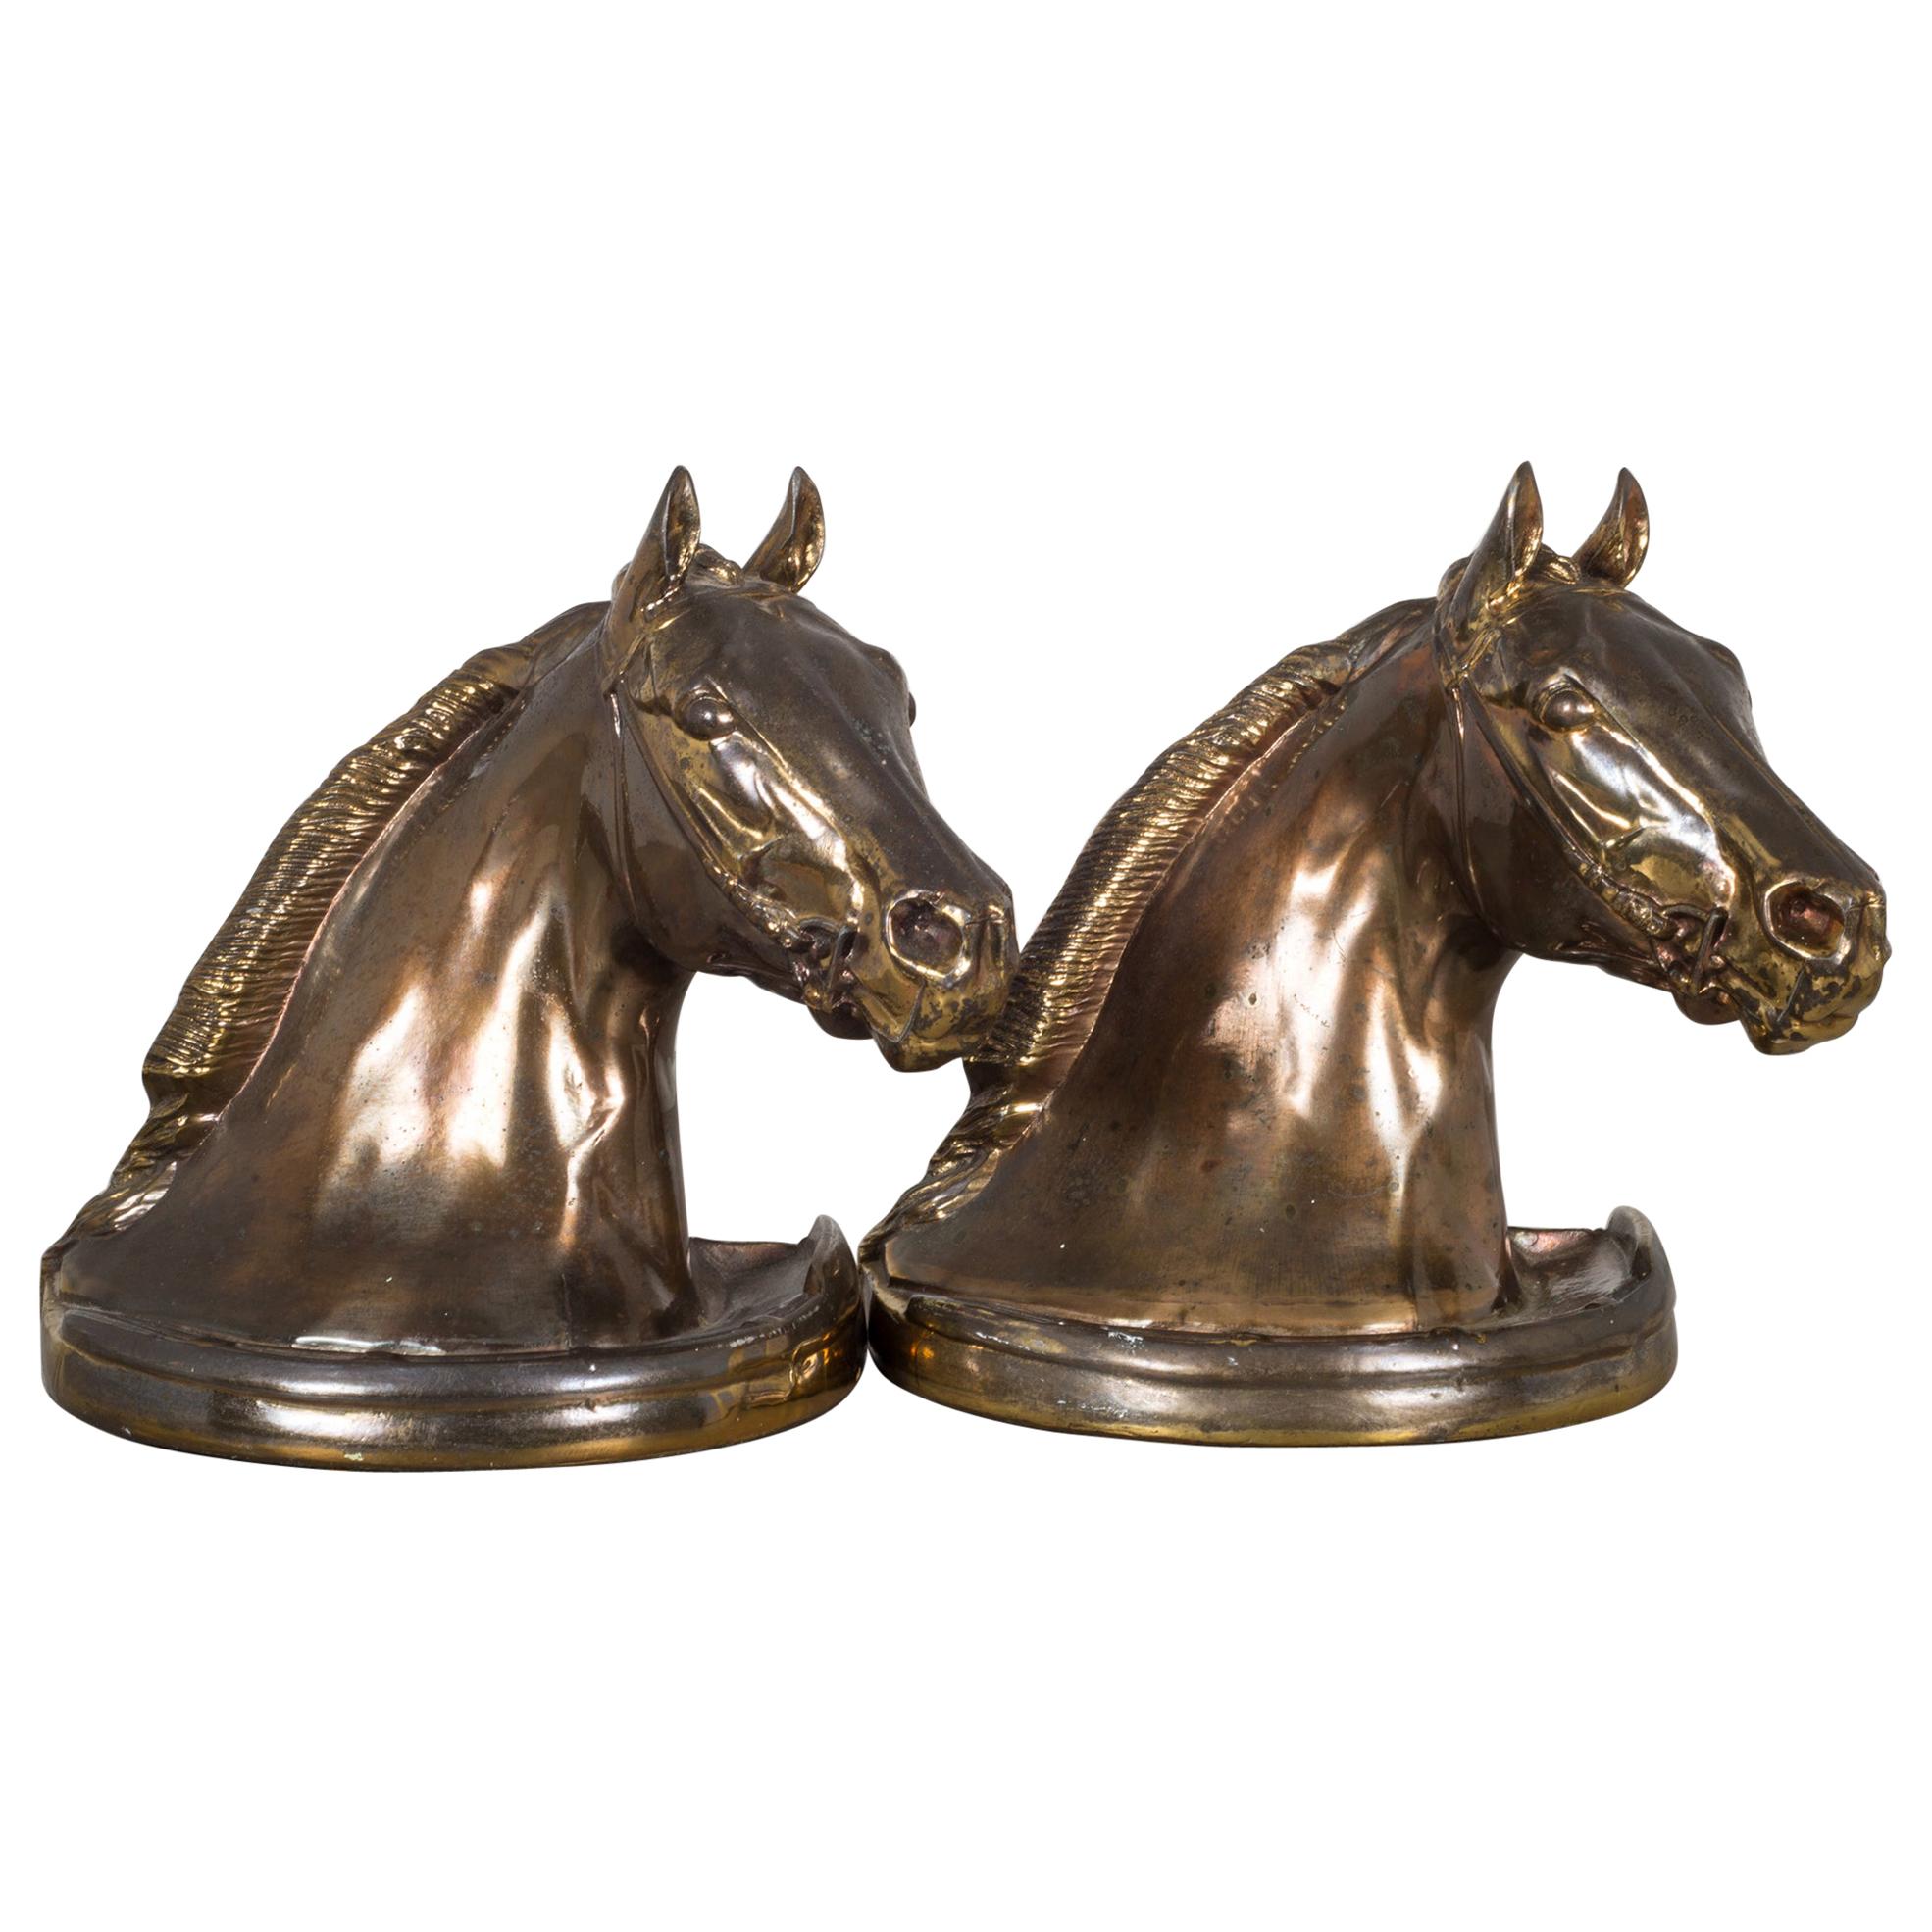 Bronze Plated Horse Head Bookends by Glady's Brown and Dodge, circa 1930